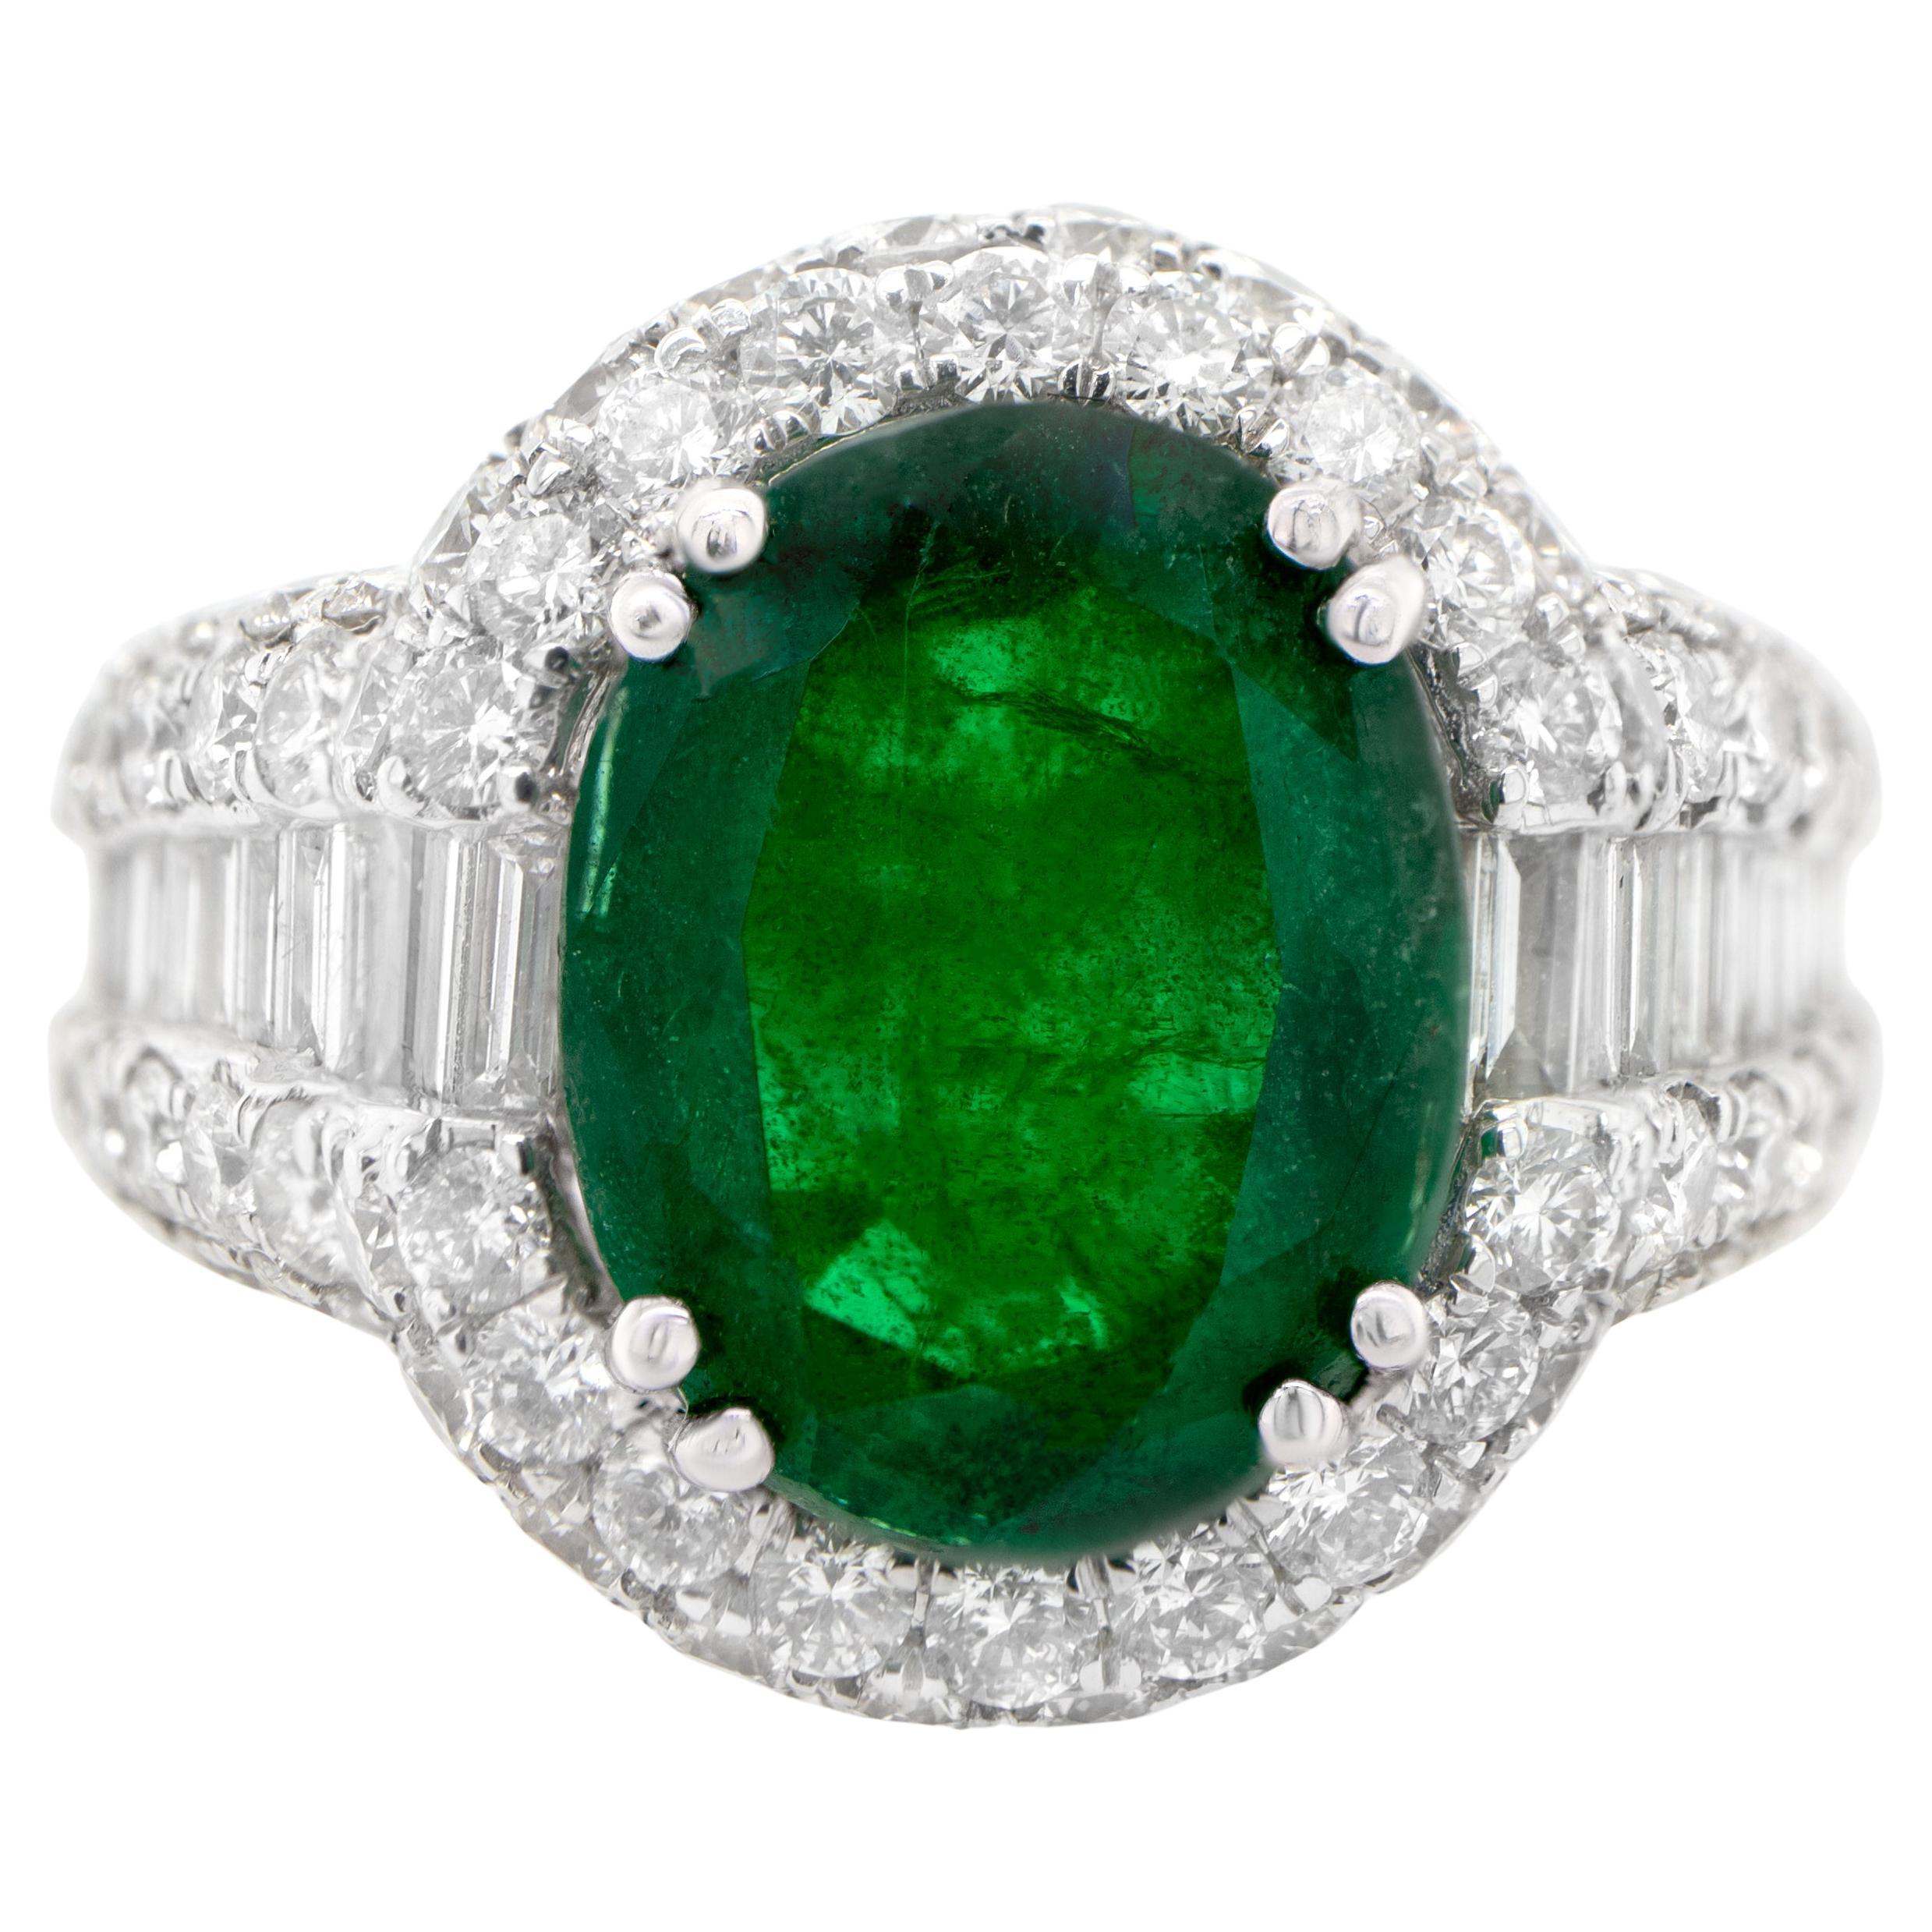 Oval Emerald Statement Ring With Diamond Setting 6.31 Carats 18K Gold For Sale